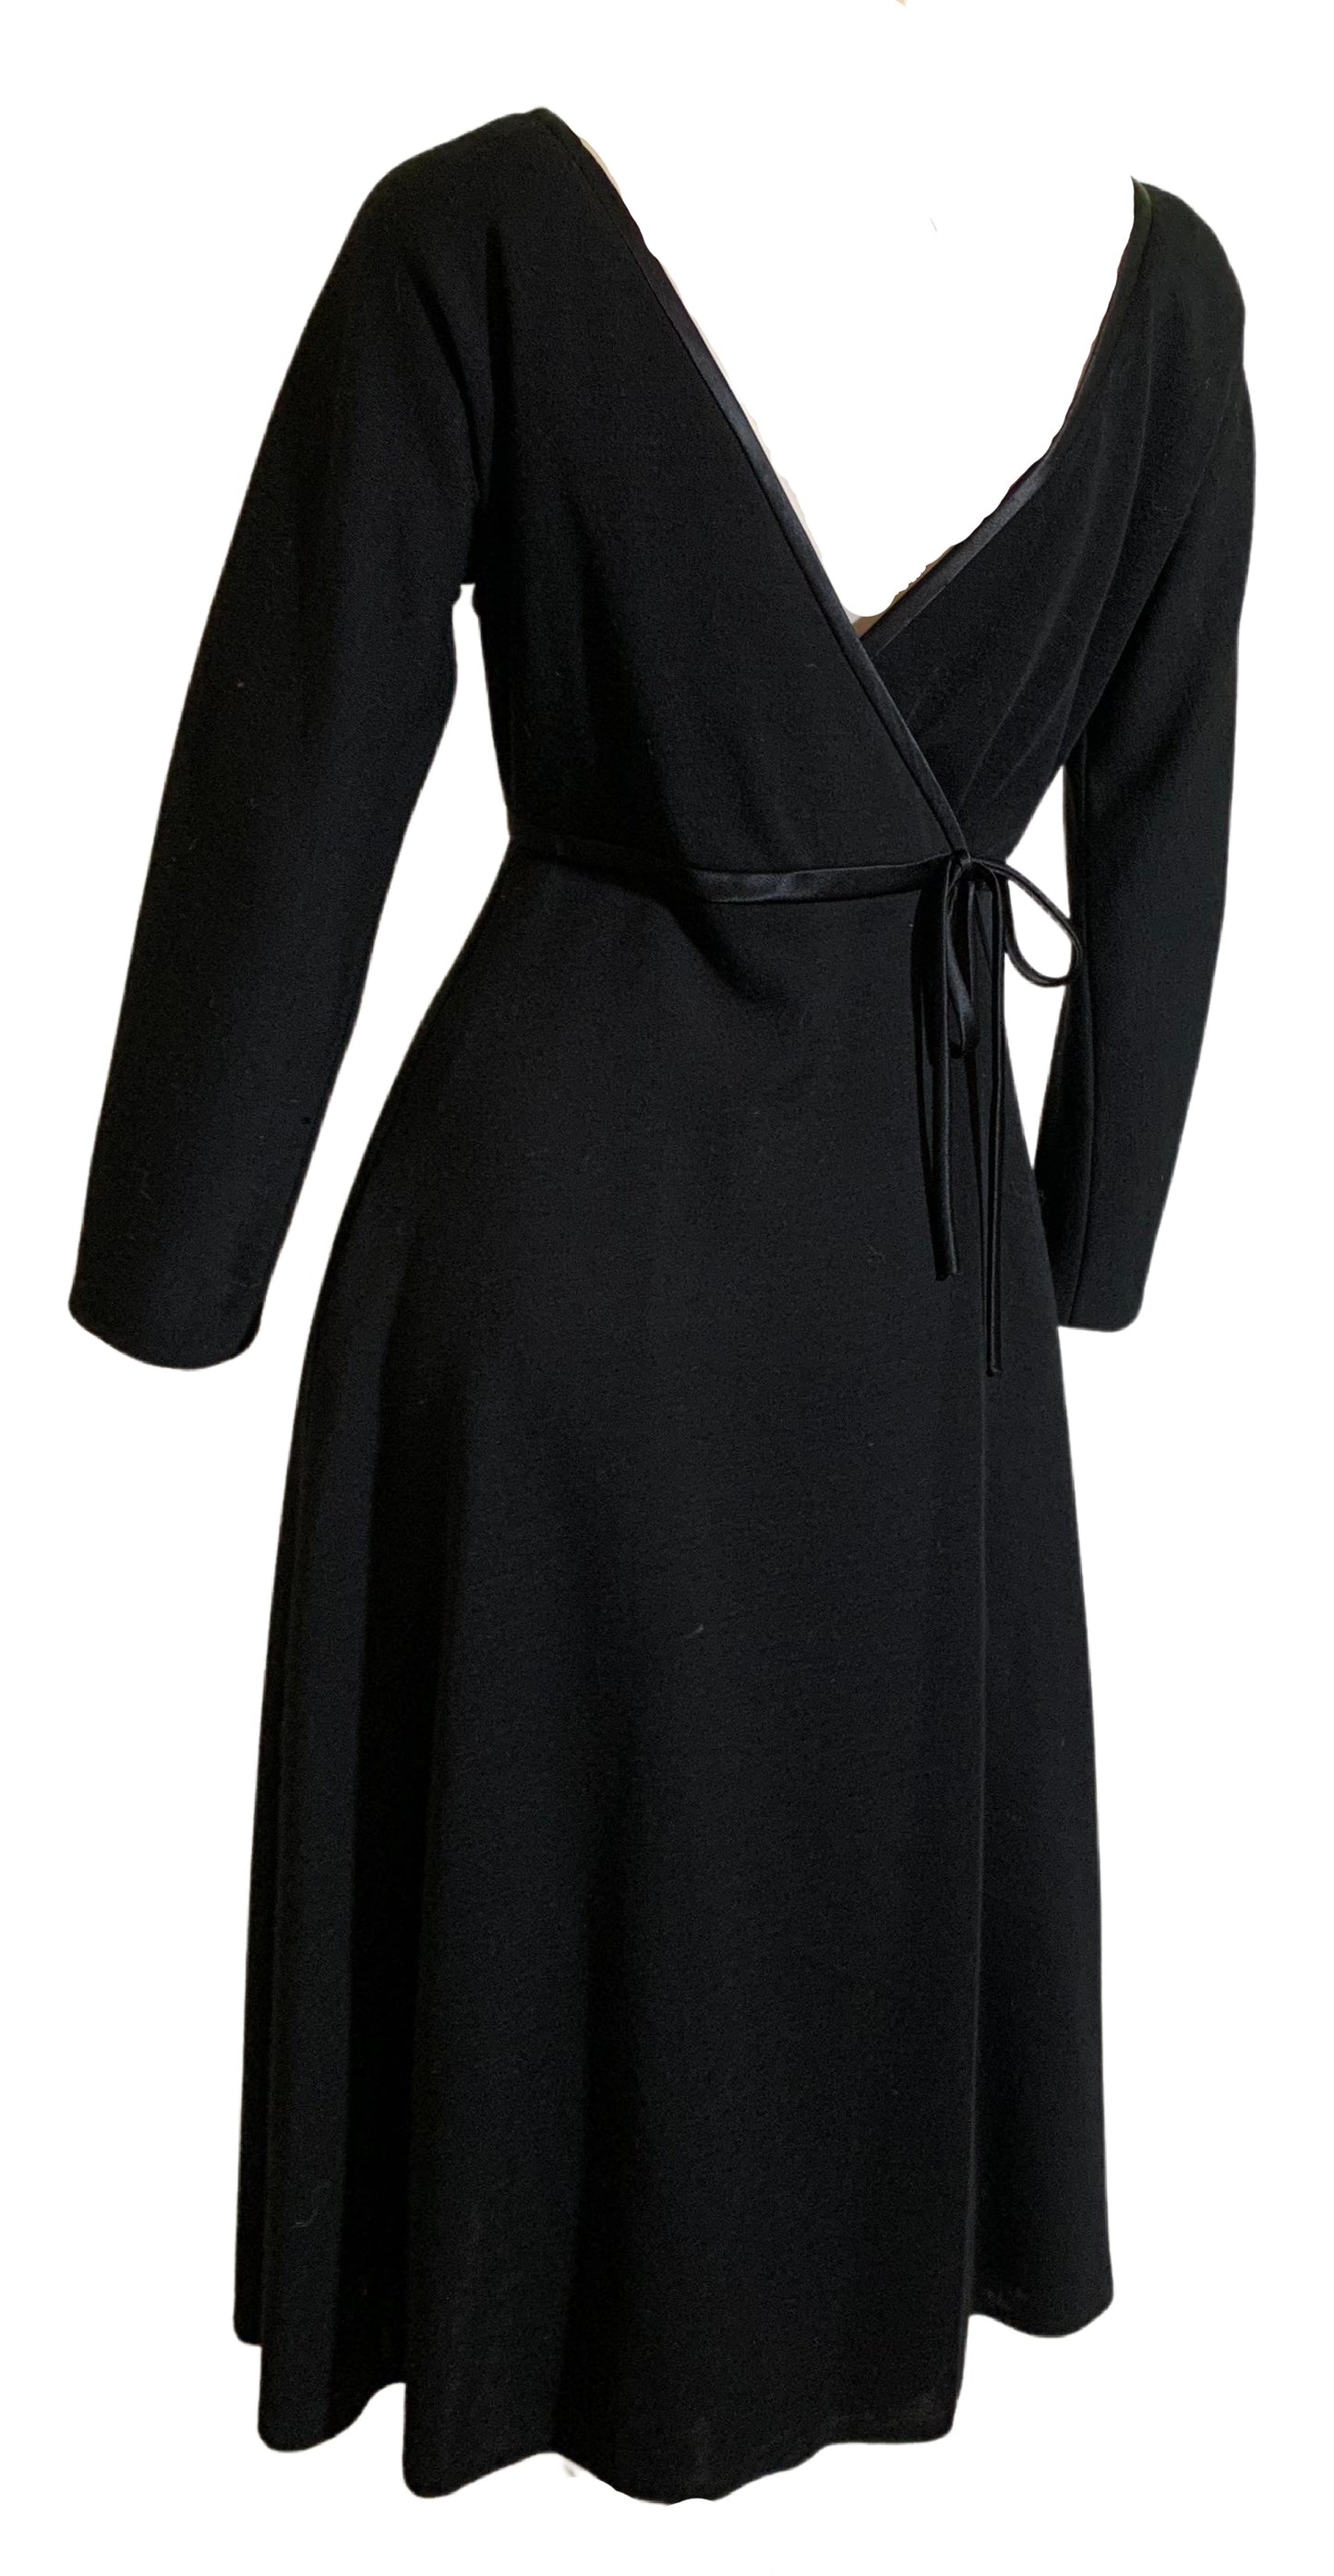 Black Wool Wrap Dress Low Back with Bow with POCKETS! circa 1960s